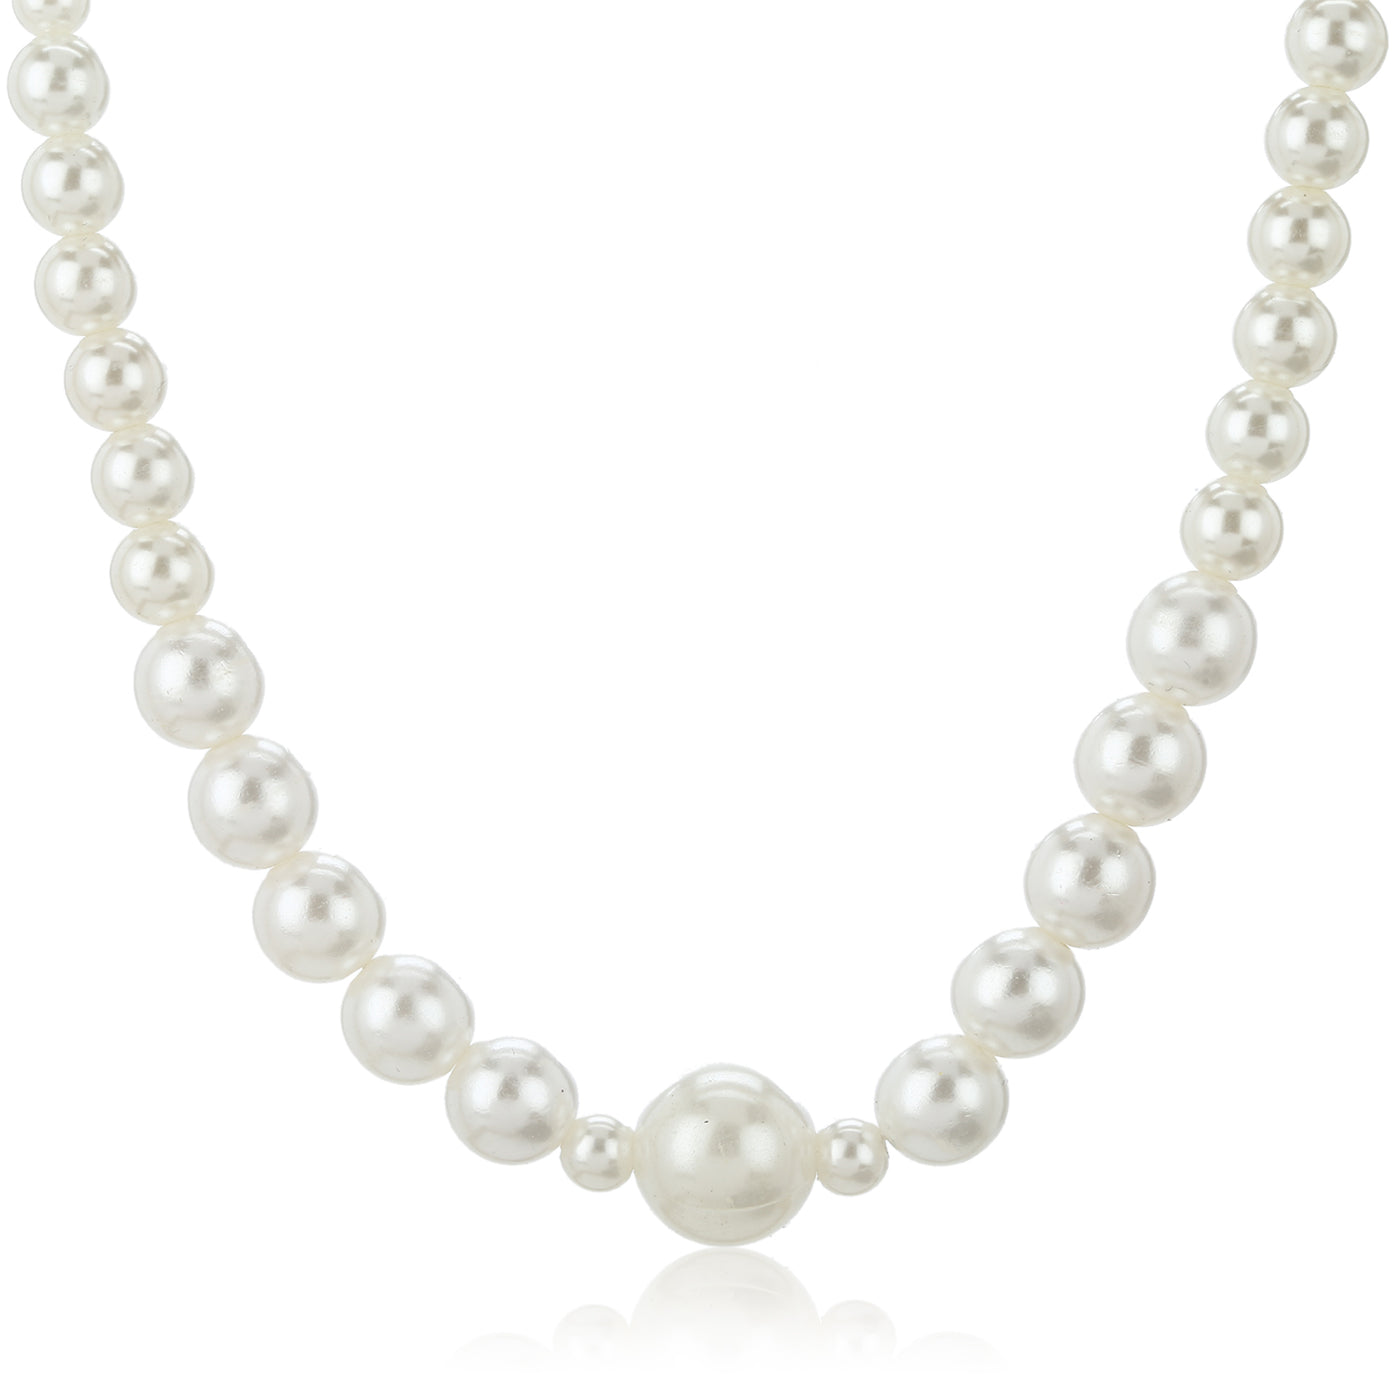 Estele - Handcrafted One Line Flux White Pearl Necklace